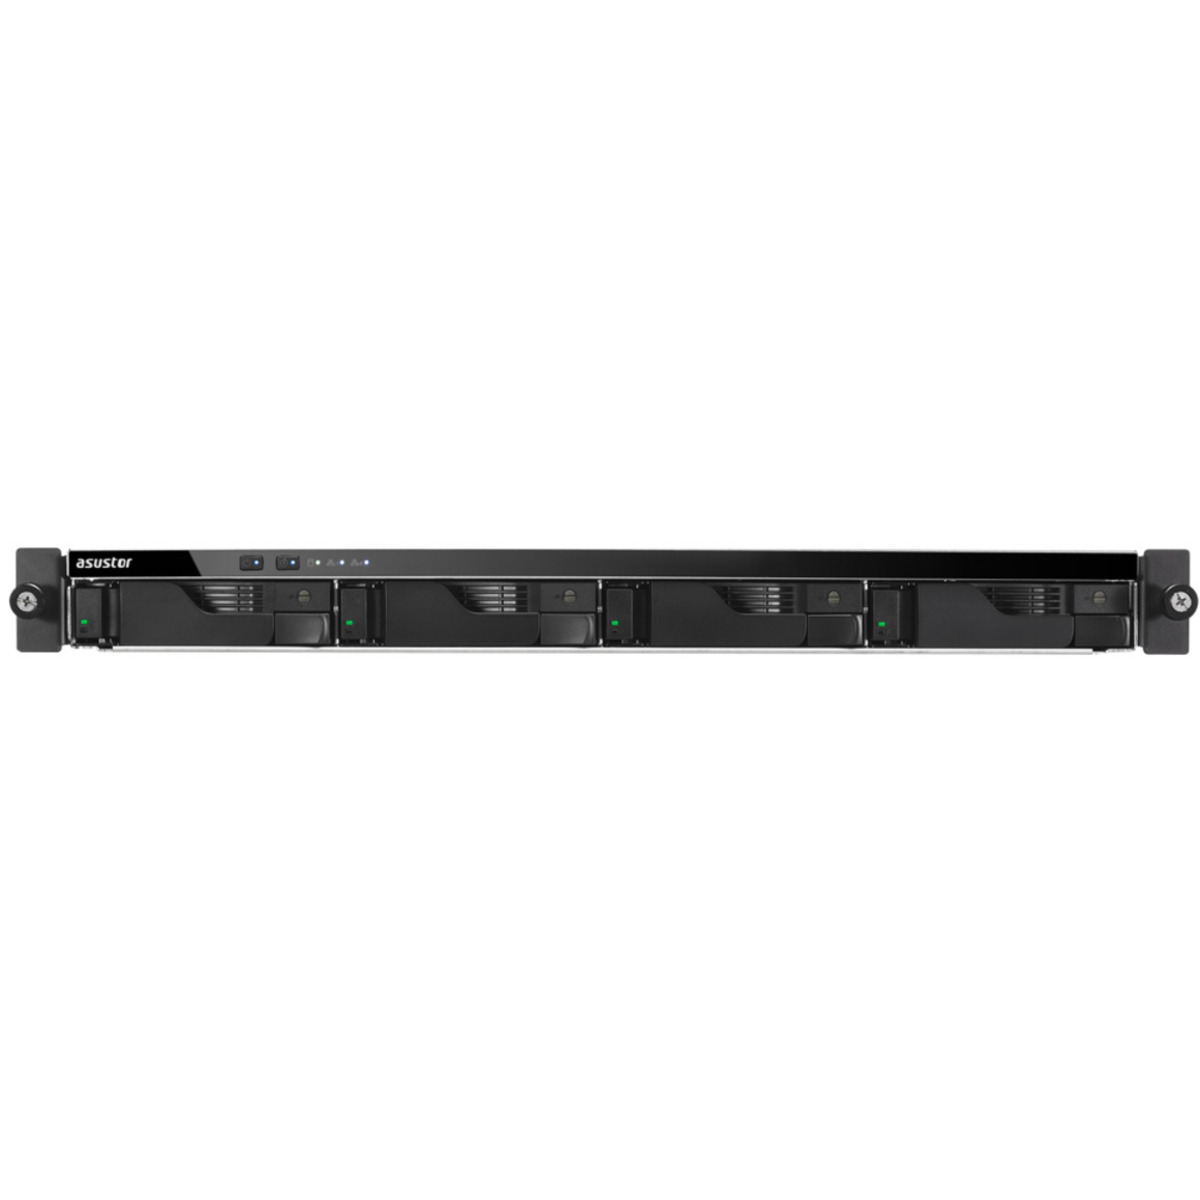 ASUSTOR LOCKERSTOR 4RD AS6504RD 20tb 4-Bay RackMount Multimedia / Power User / Business NAS - Network Attached Storage Device 2x10tb Western Digital Red Plus WD101EFBX 3.5 7200rpm SATA 6Gb/s HDD NAS Class Drives Installed - Burn-In Tested - FREE RAM UPGRADE LOCKERSTOR 4RD AS6504RD